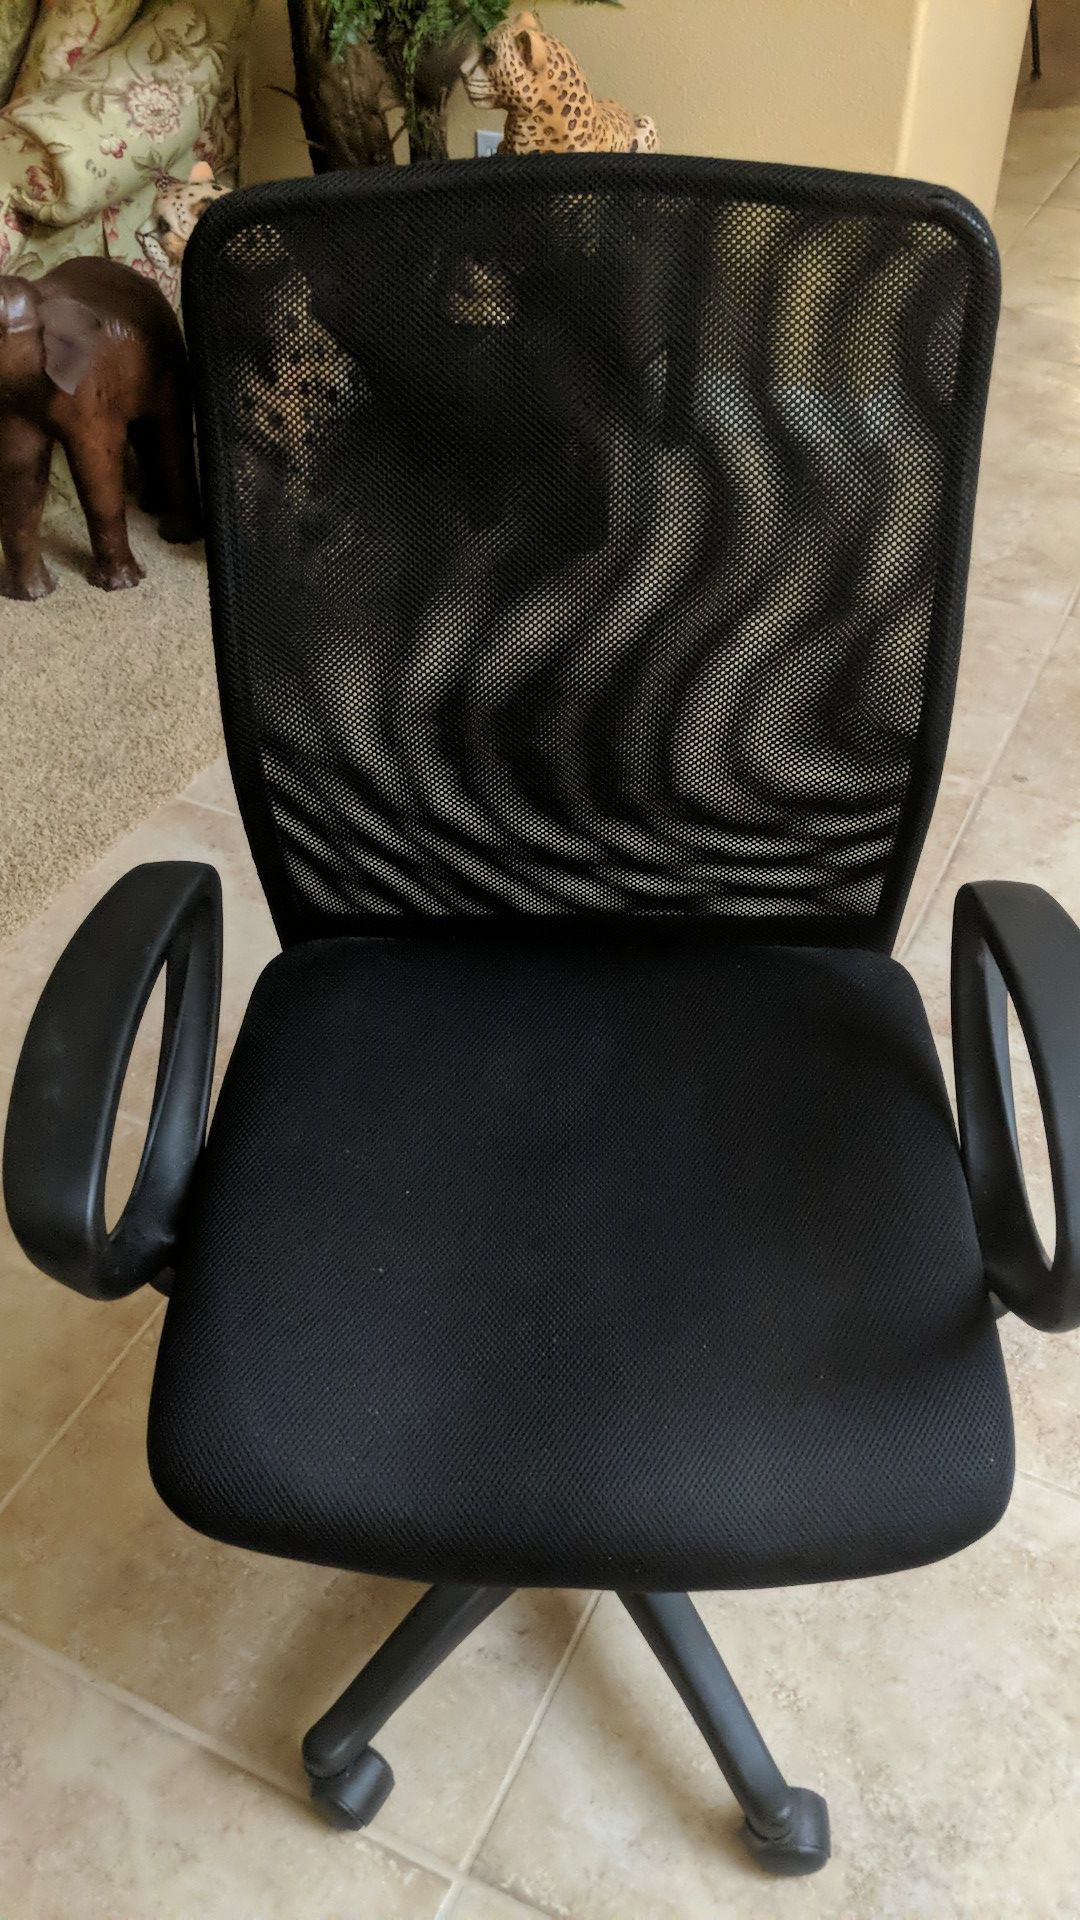 Computer chair in good condition.